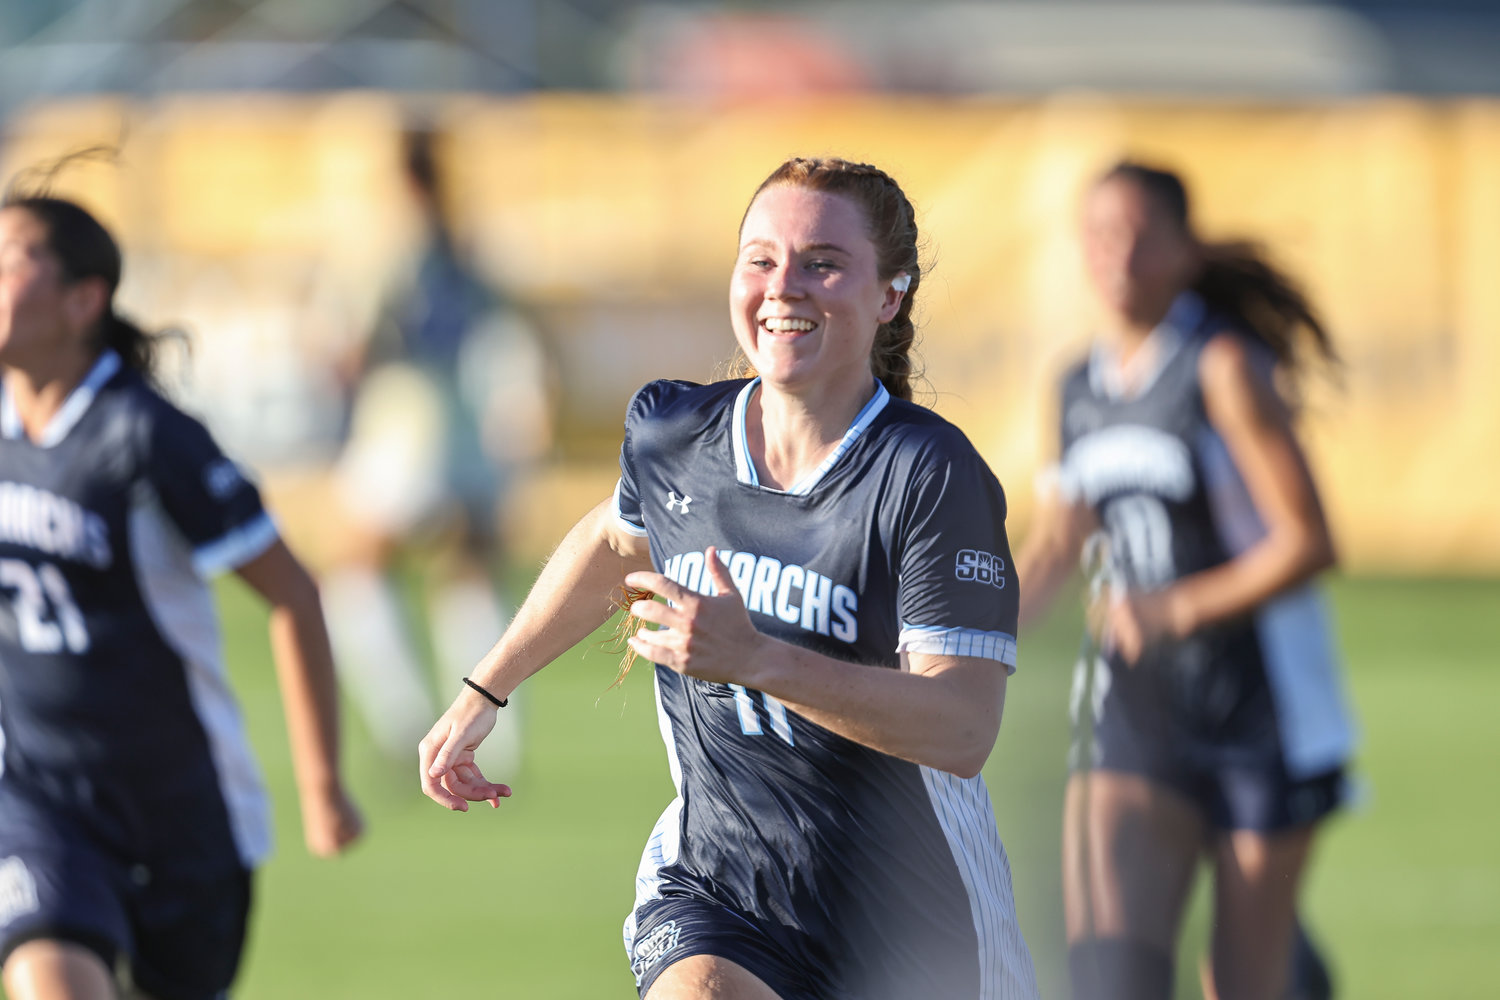 Old Dominion senior Carla Morich celebrates one of her three goals she scored in the Sun Belt Conference Championship game against the James Madison Dukes Sunday, Nov. 6, at the Foley Sports Tourism Complex. Morich, a forward from Hamburg, Germany, was named the tournament’s Most Outstanding Player.